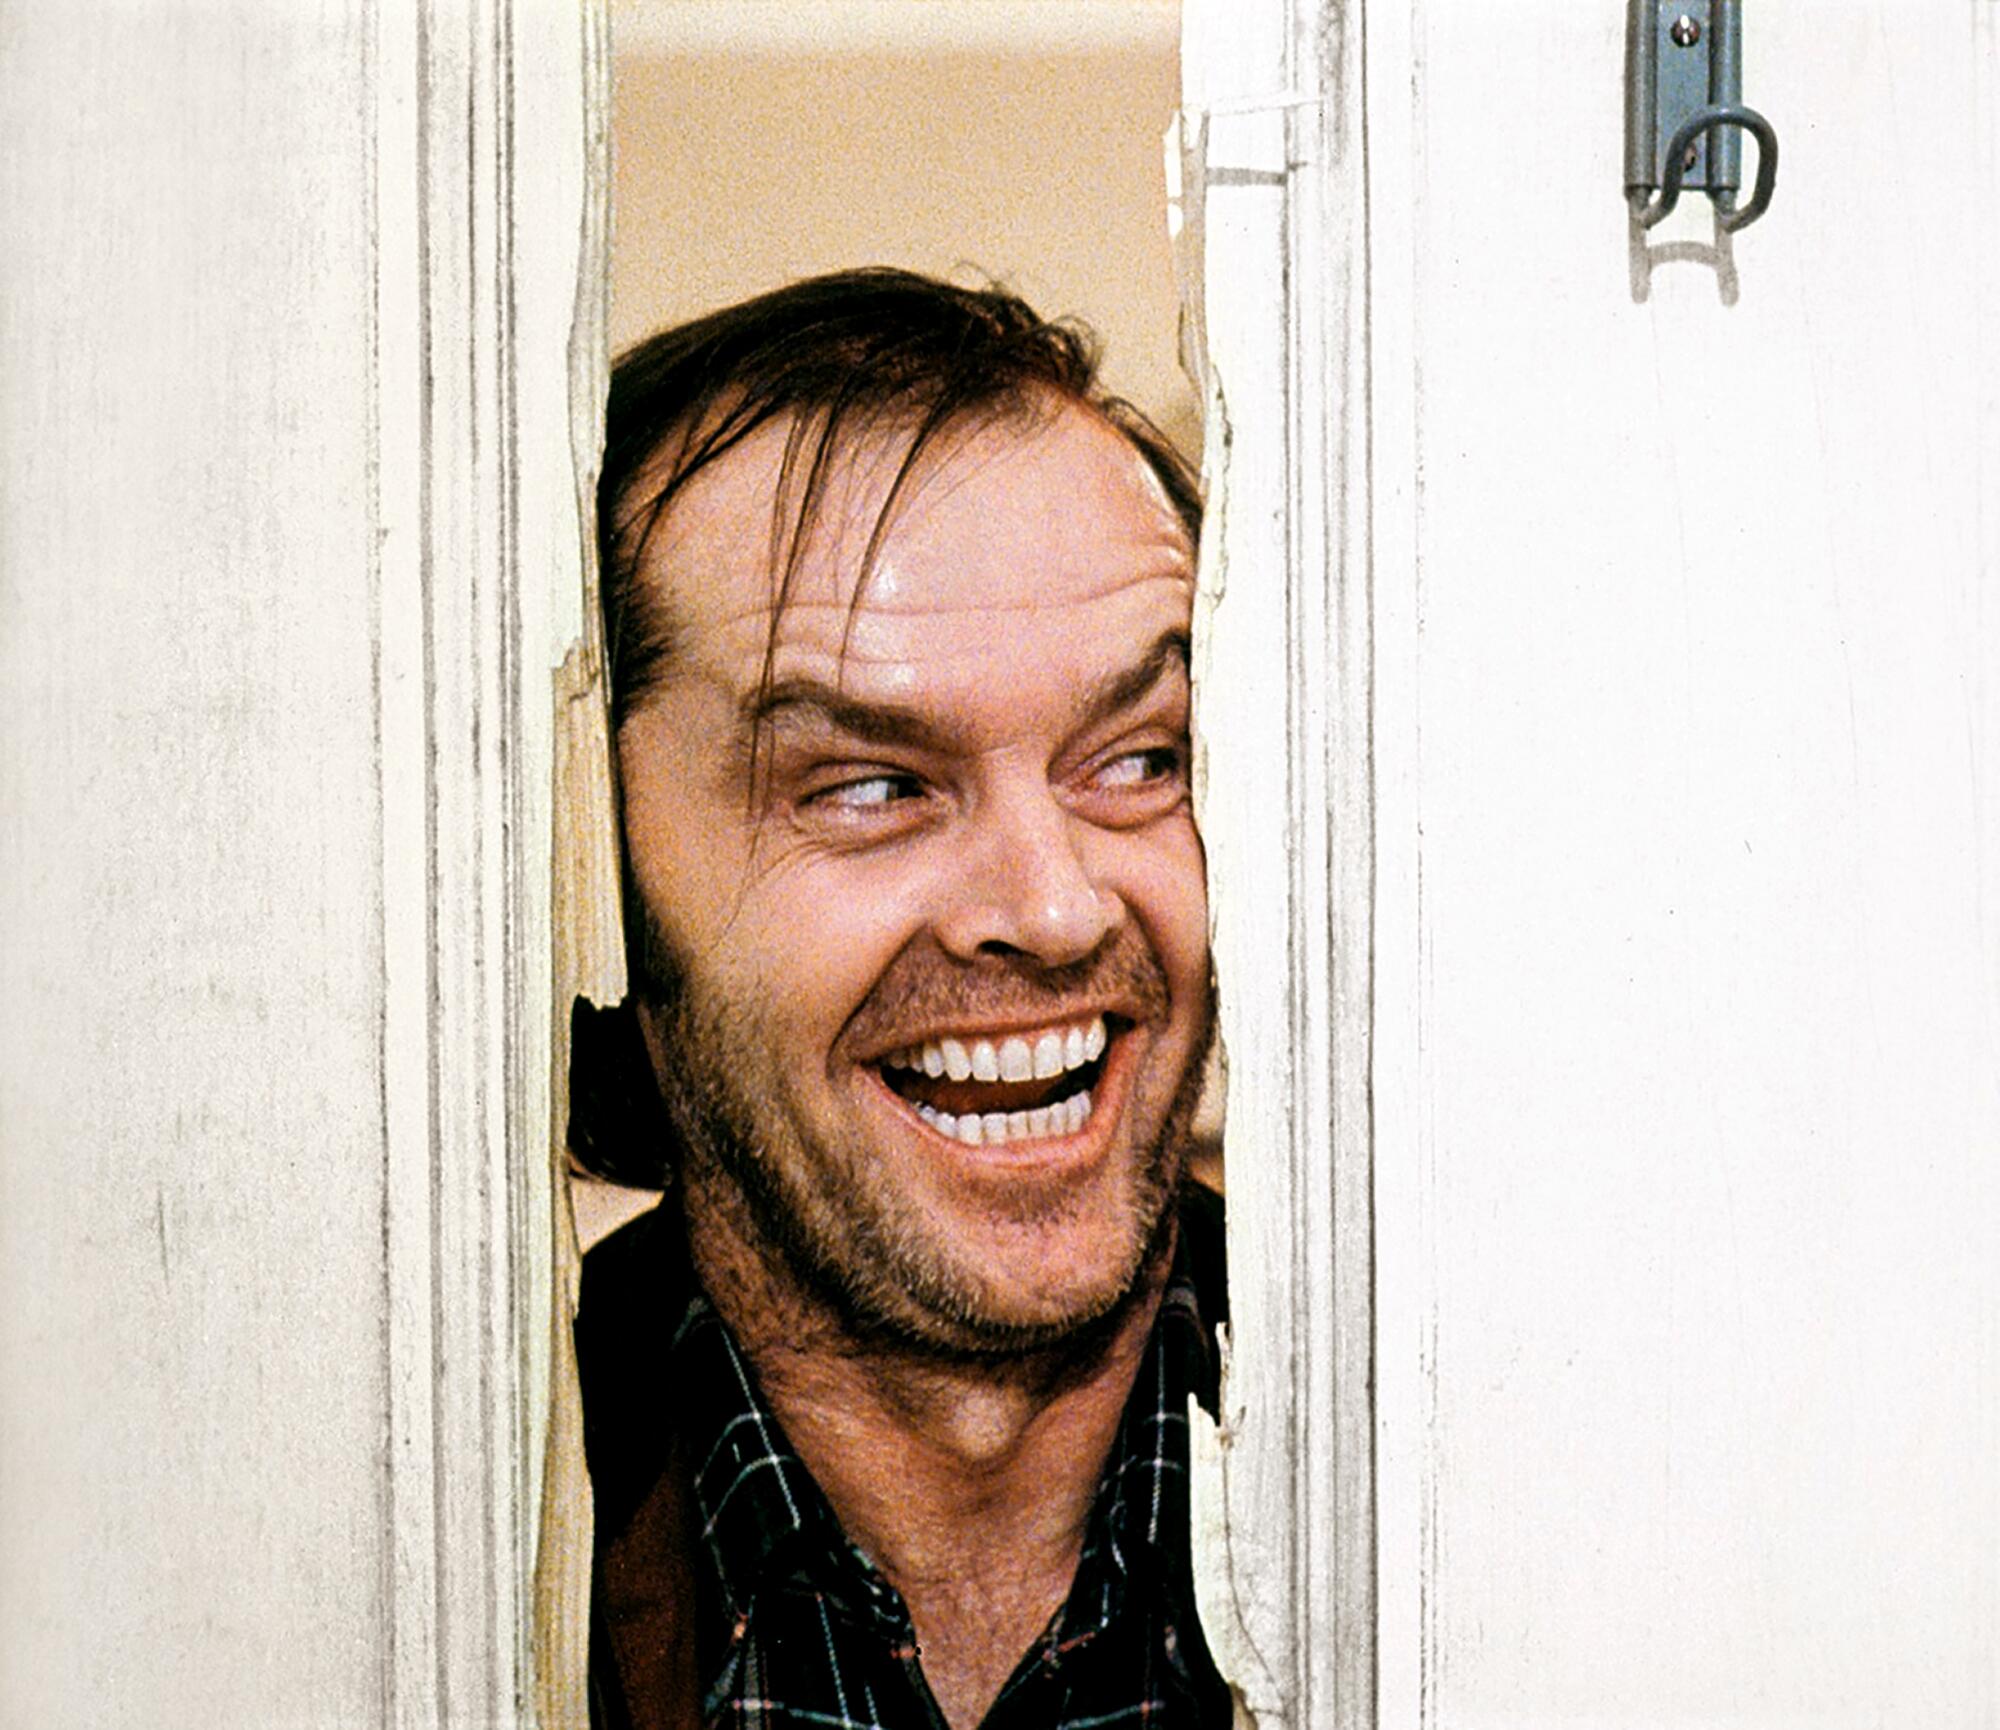 An alternate take of Jack Nicholson in "The Shining," from a new book of ephemera.